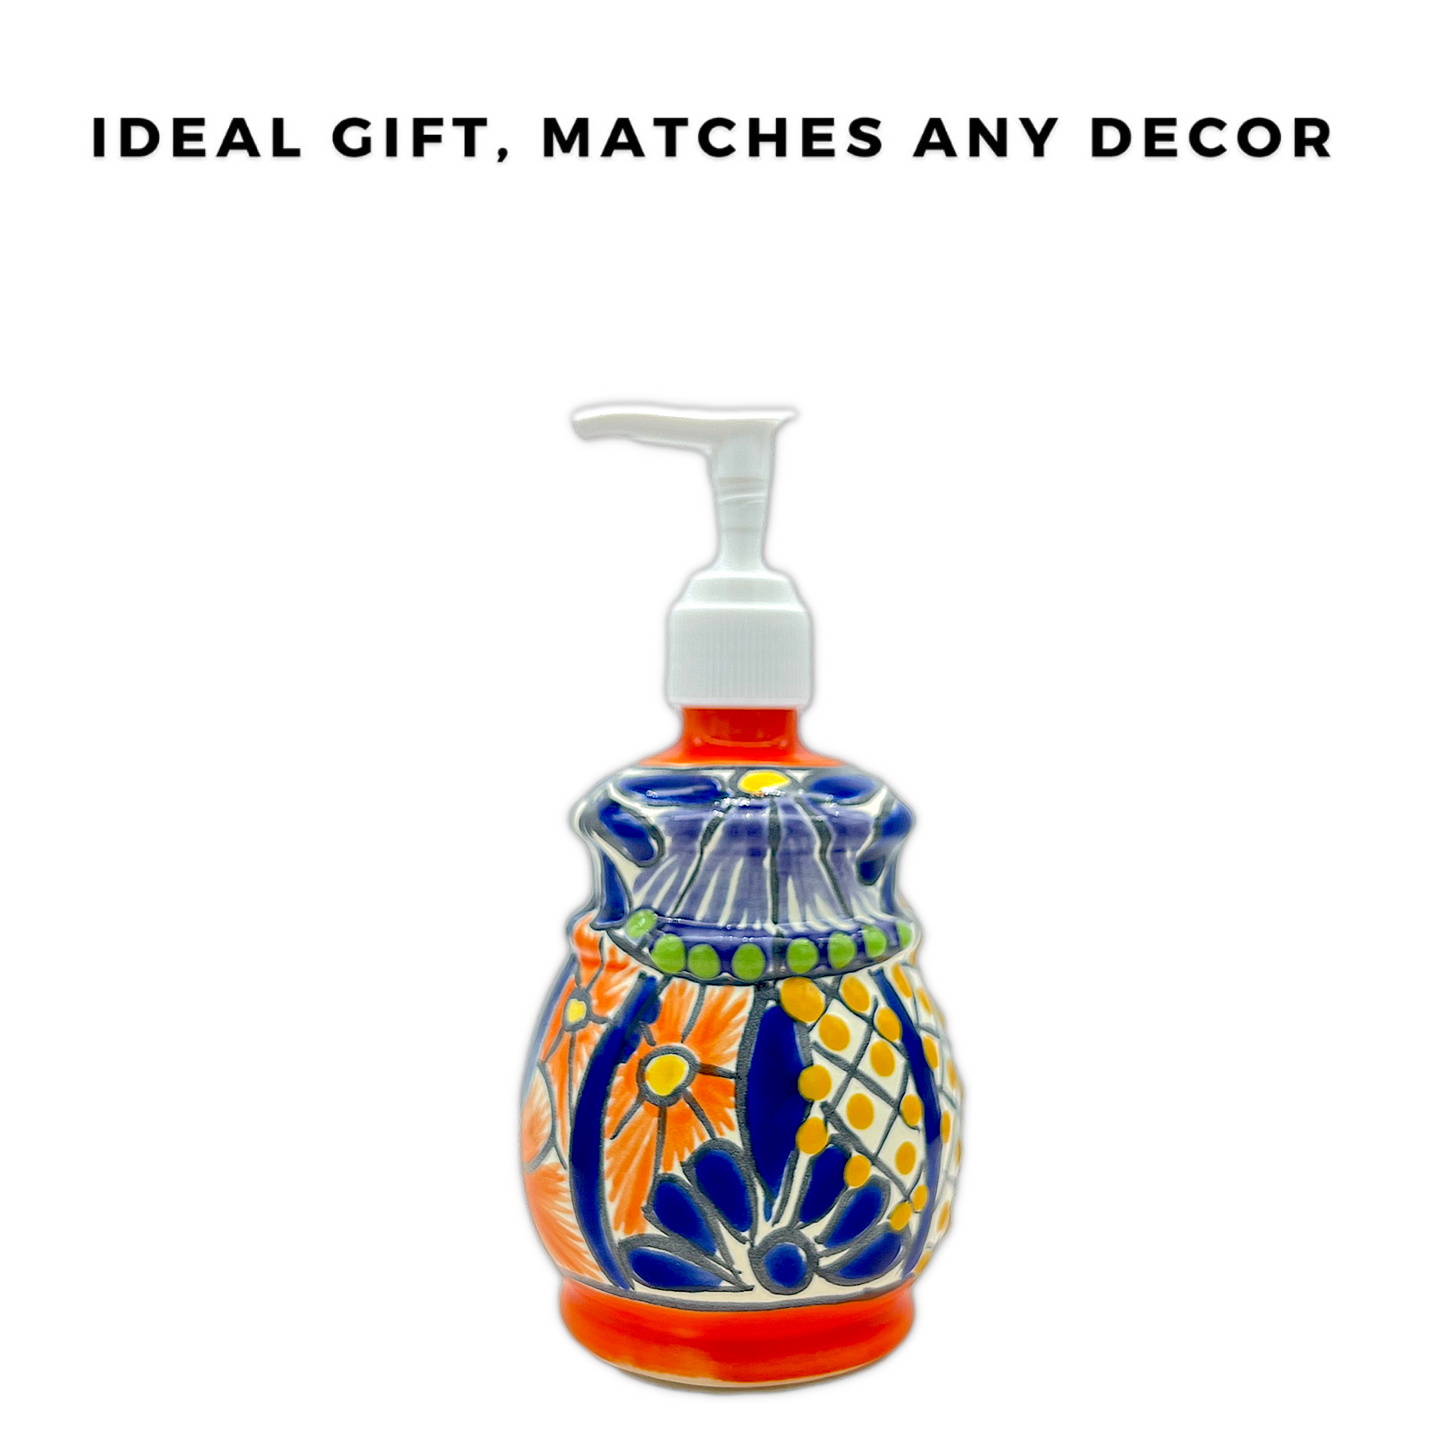 ideal gift matches any decor A multicolored, bell design, hand-painted Talavera ceramic soap dispenser sourced from skilled Mexican artisans.